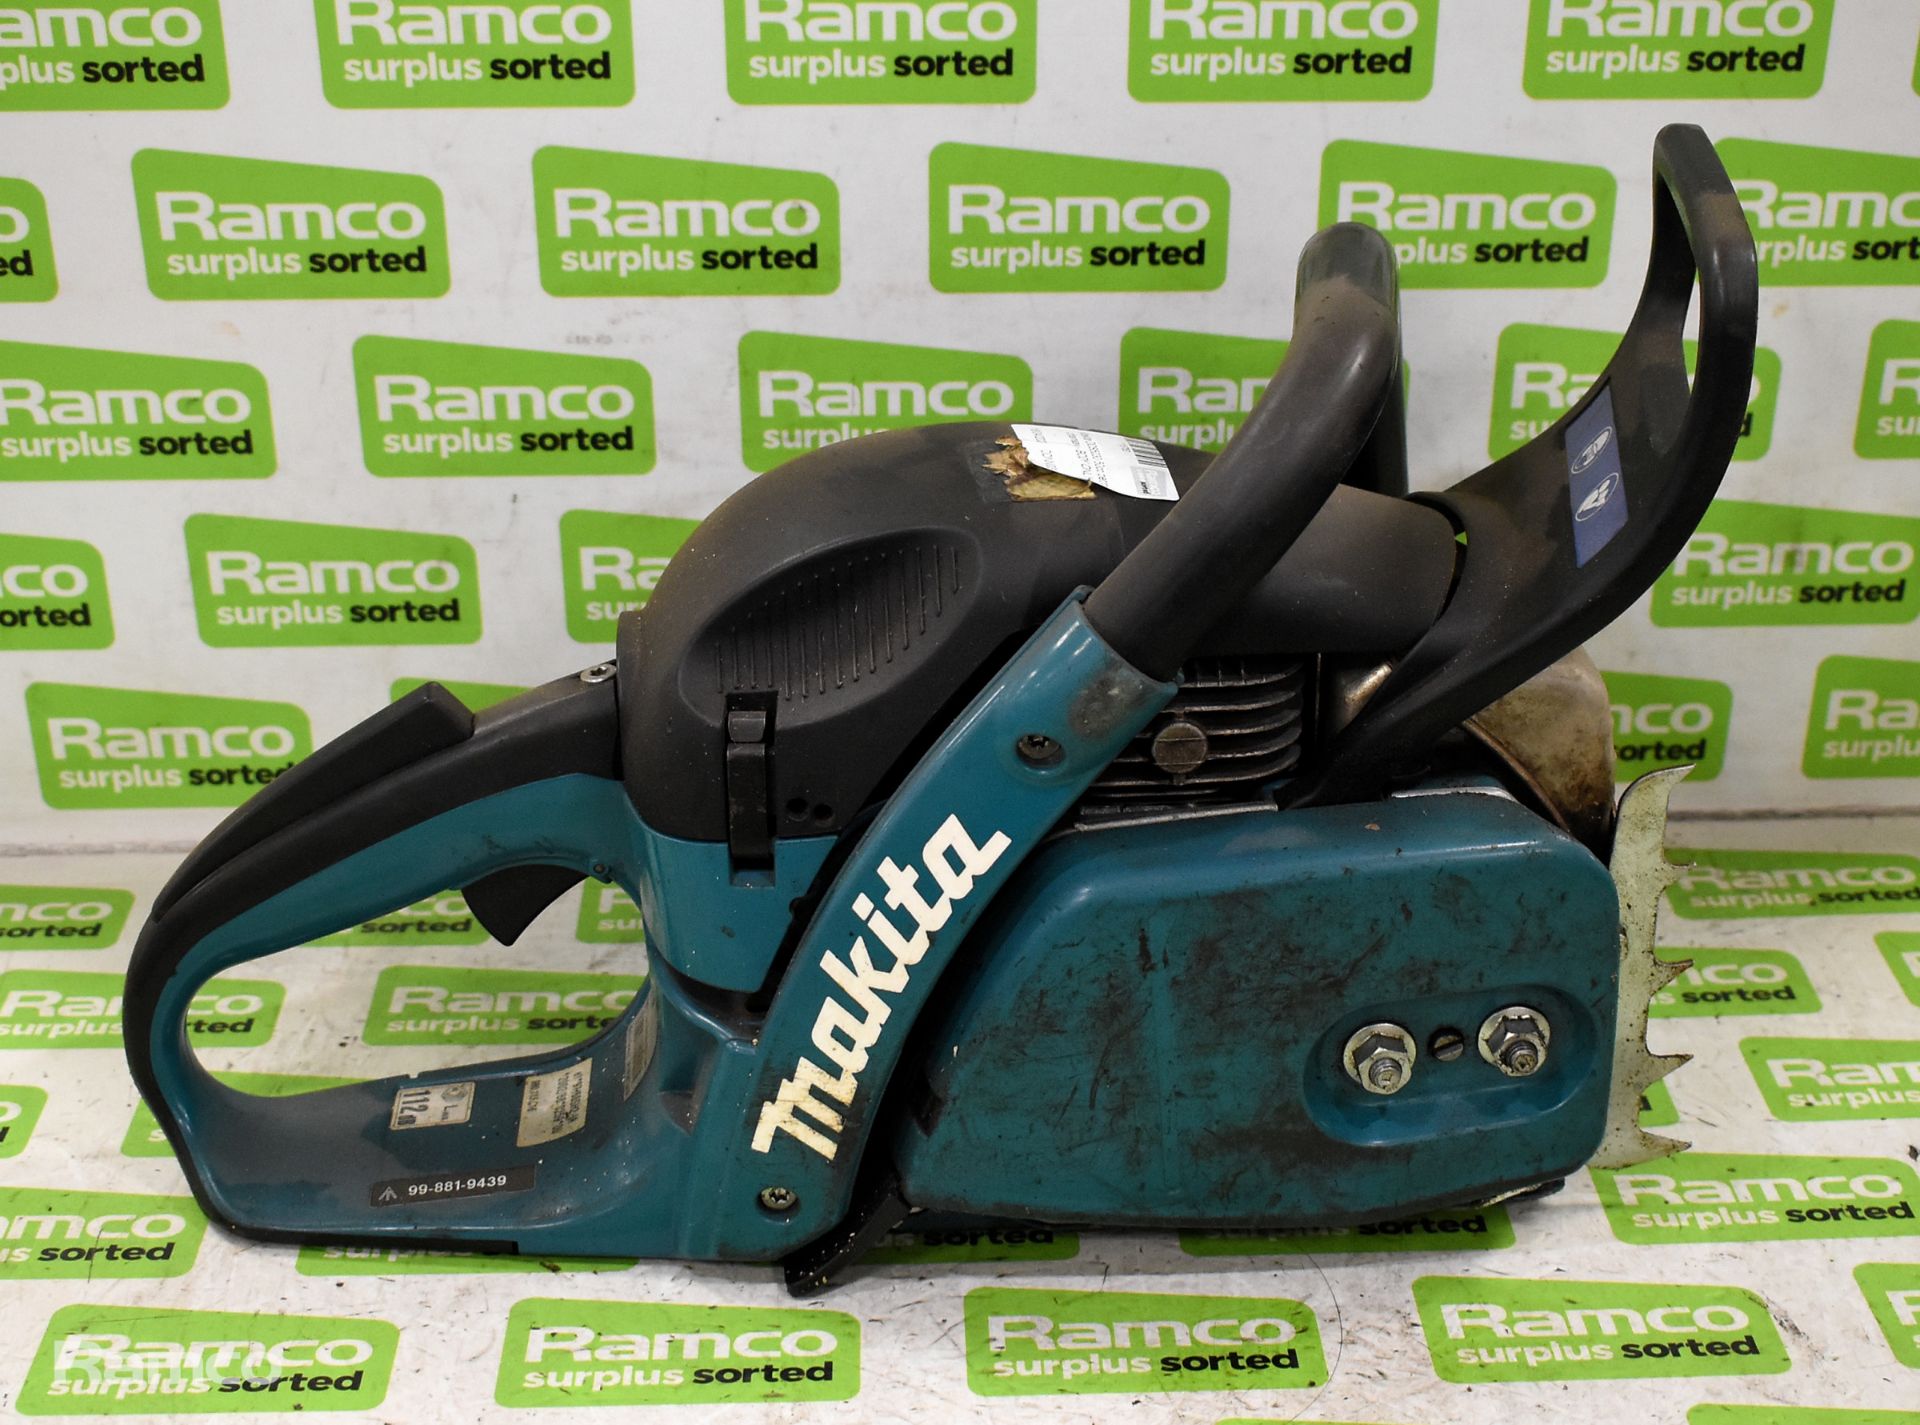 Makita DCS5030 50cc petrol chainsaw - BODY ONLY - AS SPARES OR REPAIRS